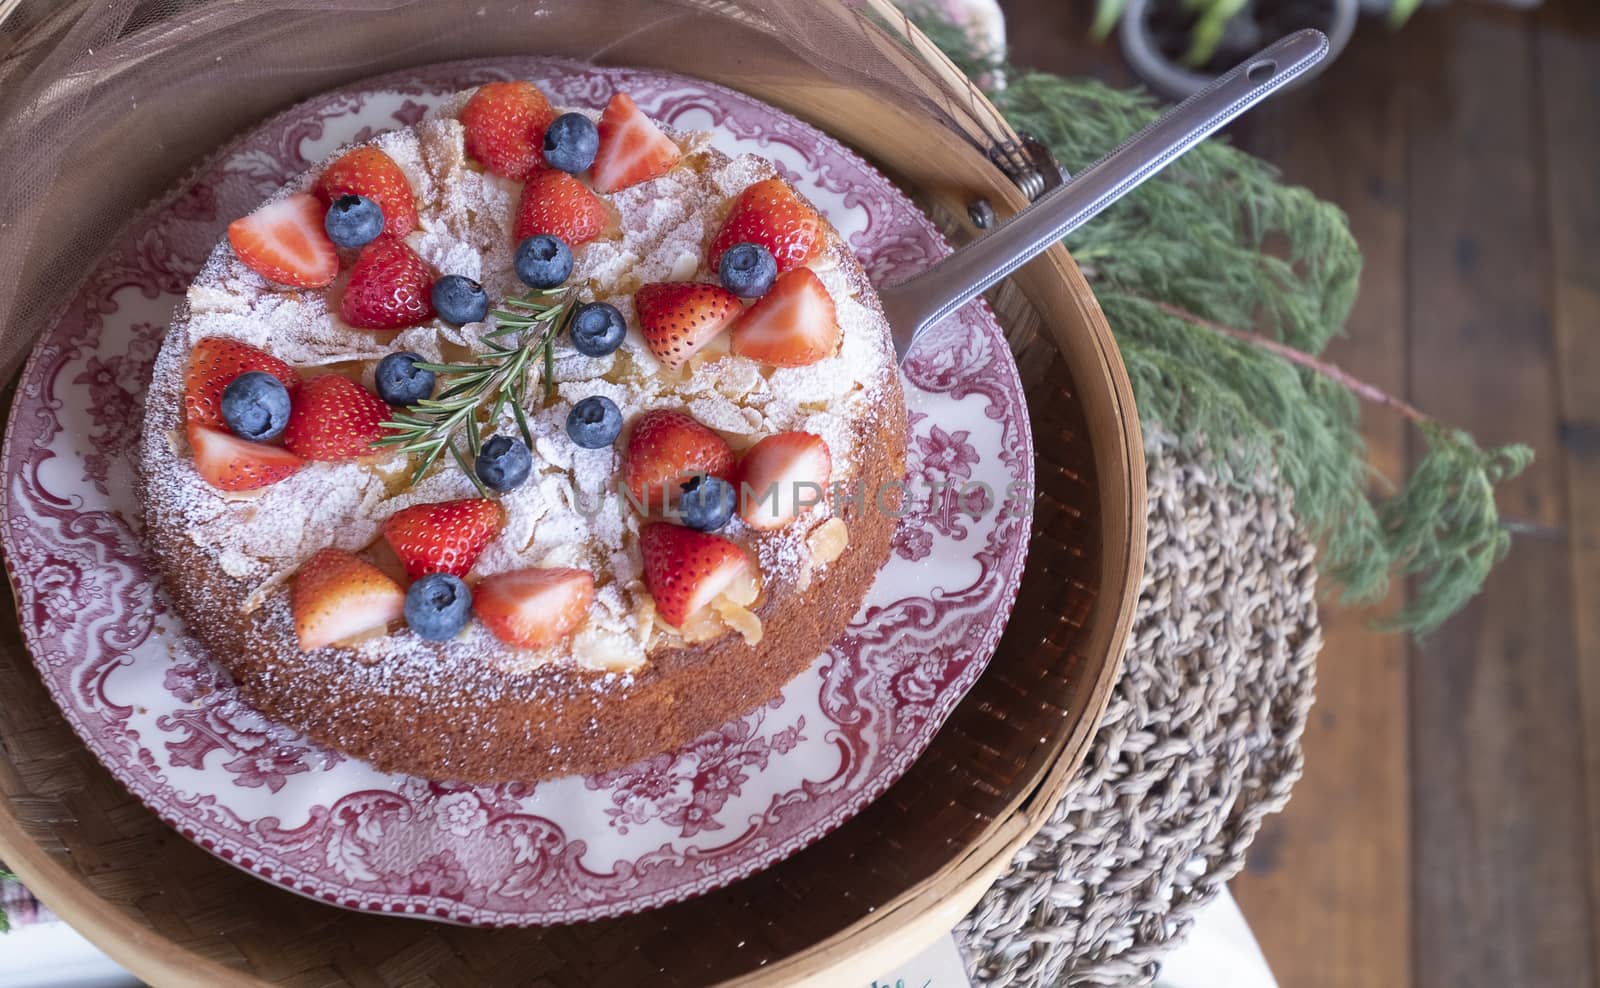 Strawberry, blueberry, almond cake by Nawoot